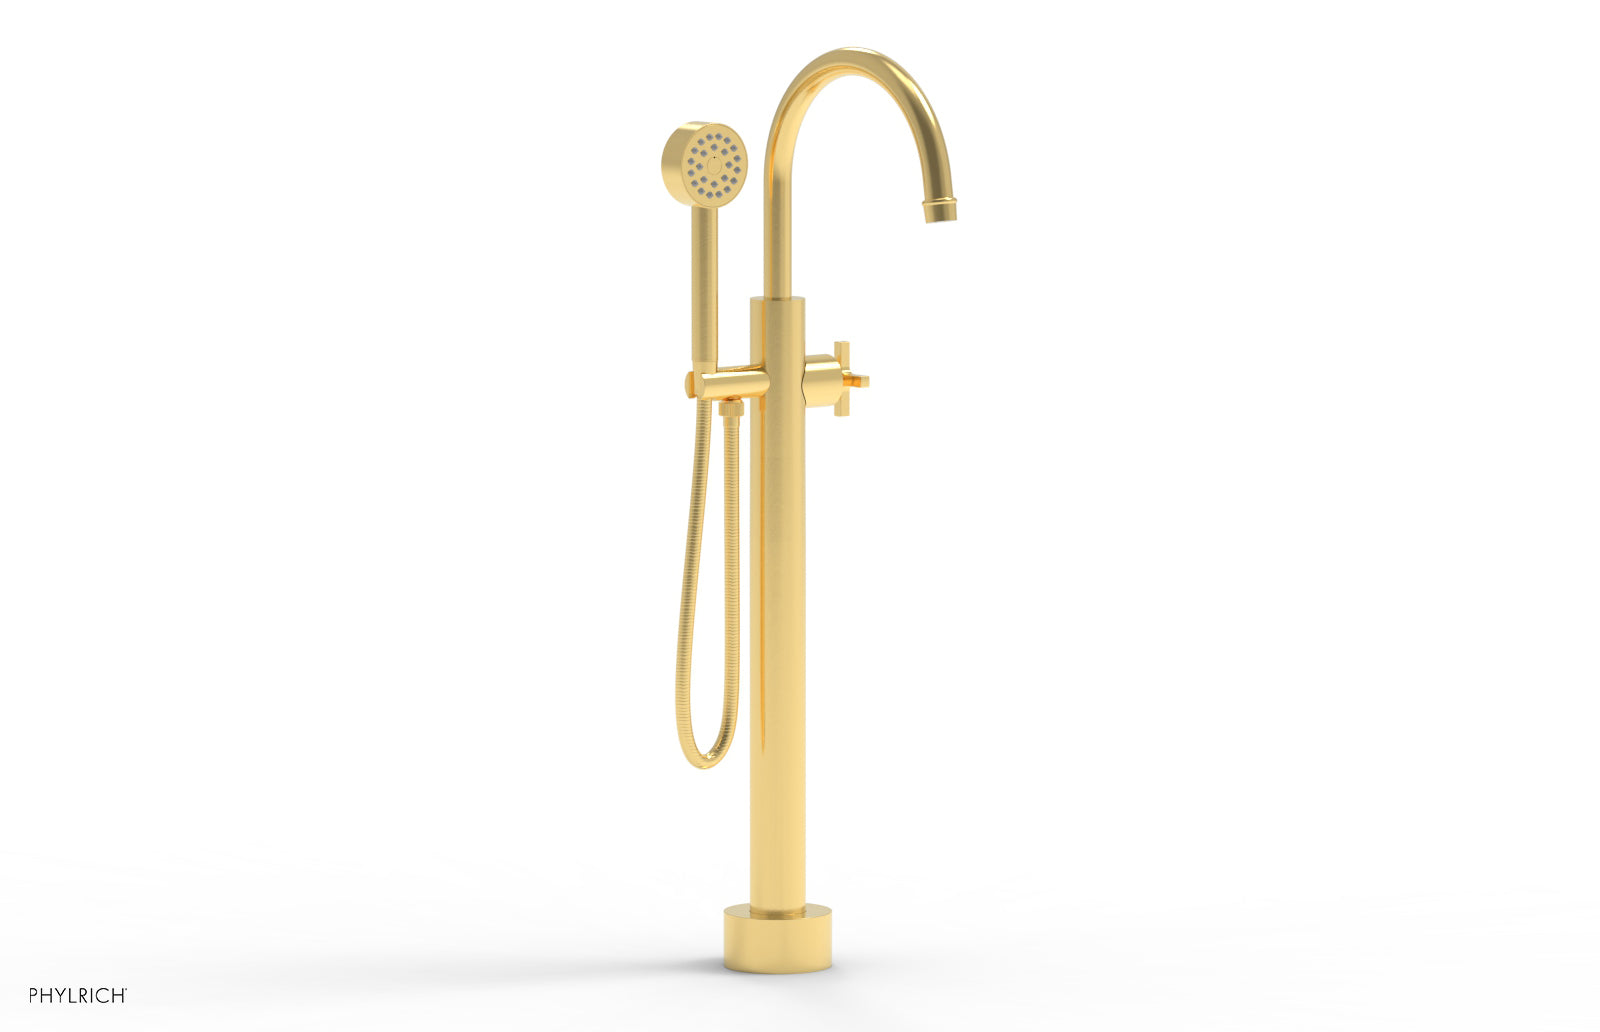 Phylrich HEX MODERN Low Floor Mount Tub Filler - Cross Handle with Hand Shower